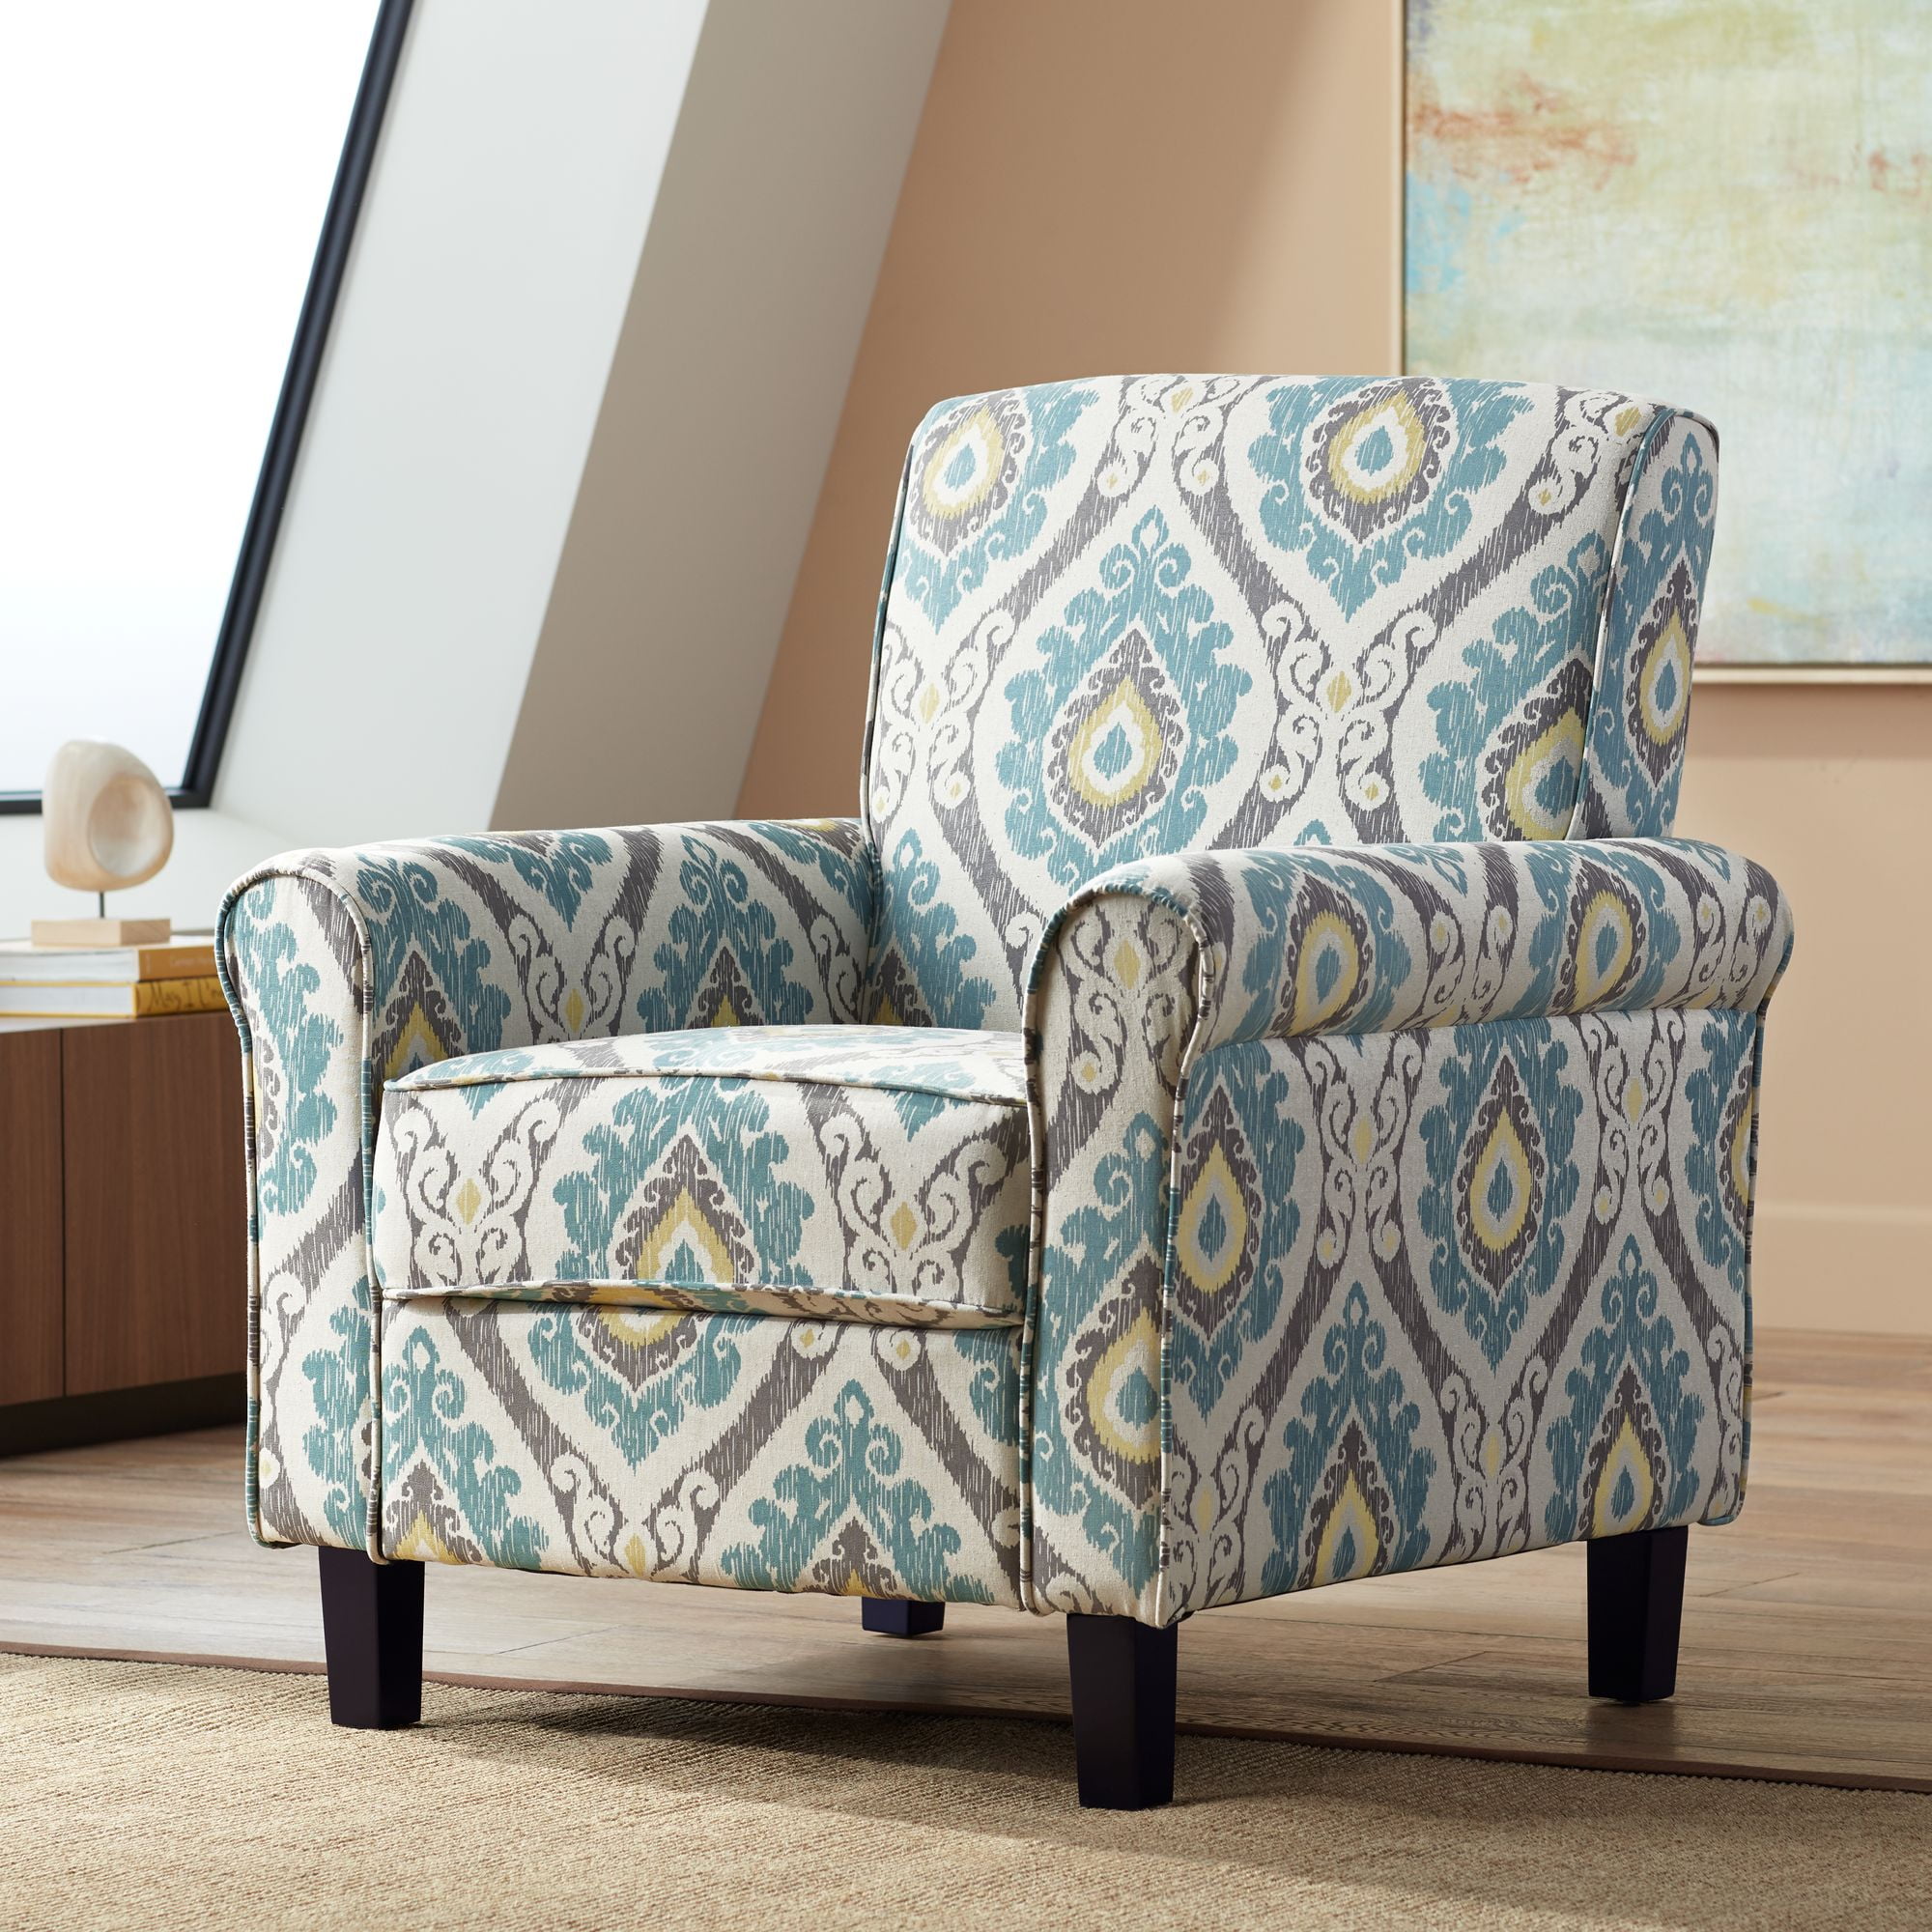 Color Ikat Print Fabric Accent Chair, Cool Multi Colored Accent Chairs